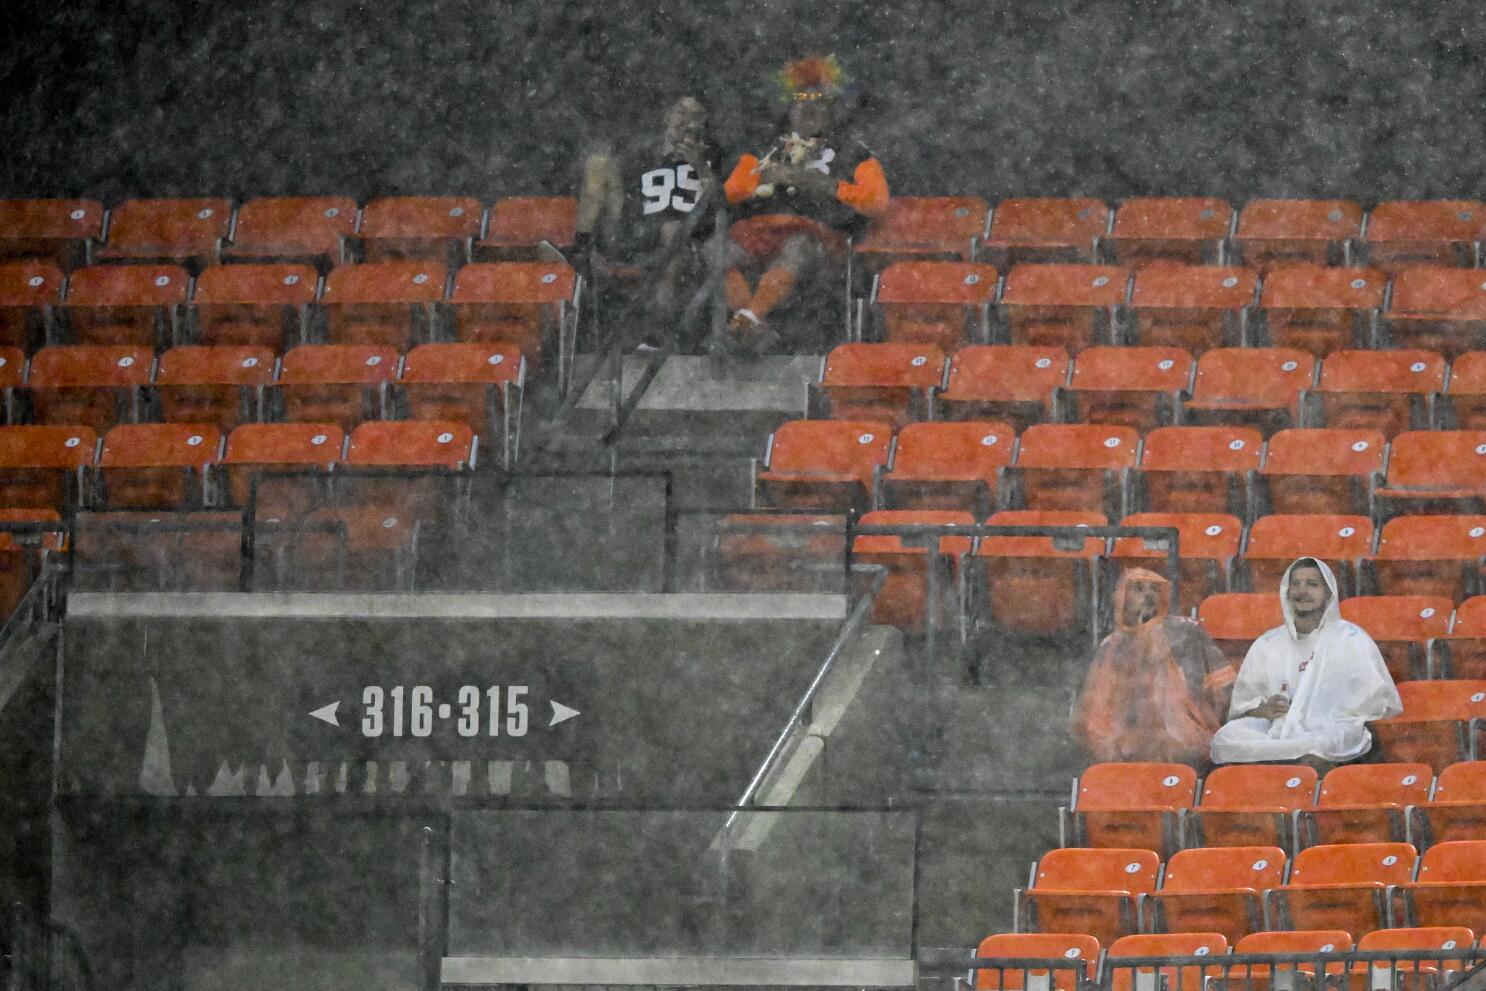 Storm, lightning delays start of exhibition between Washington Commanders  and Cleveland Browns - The San Diego Union-Tribune